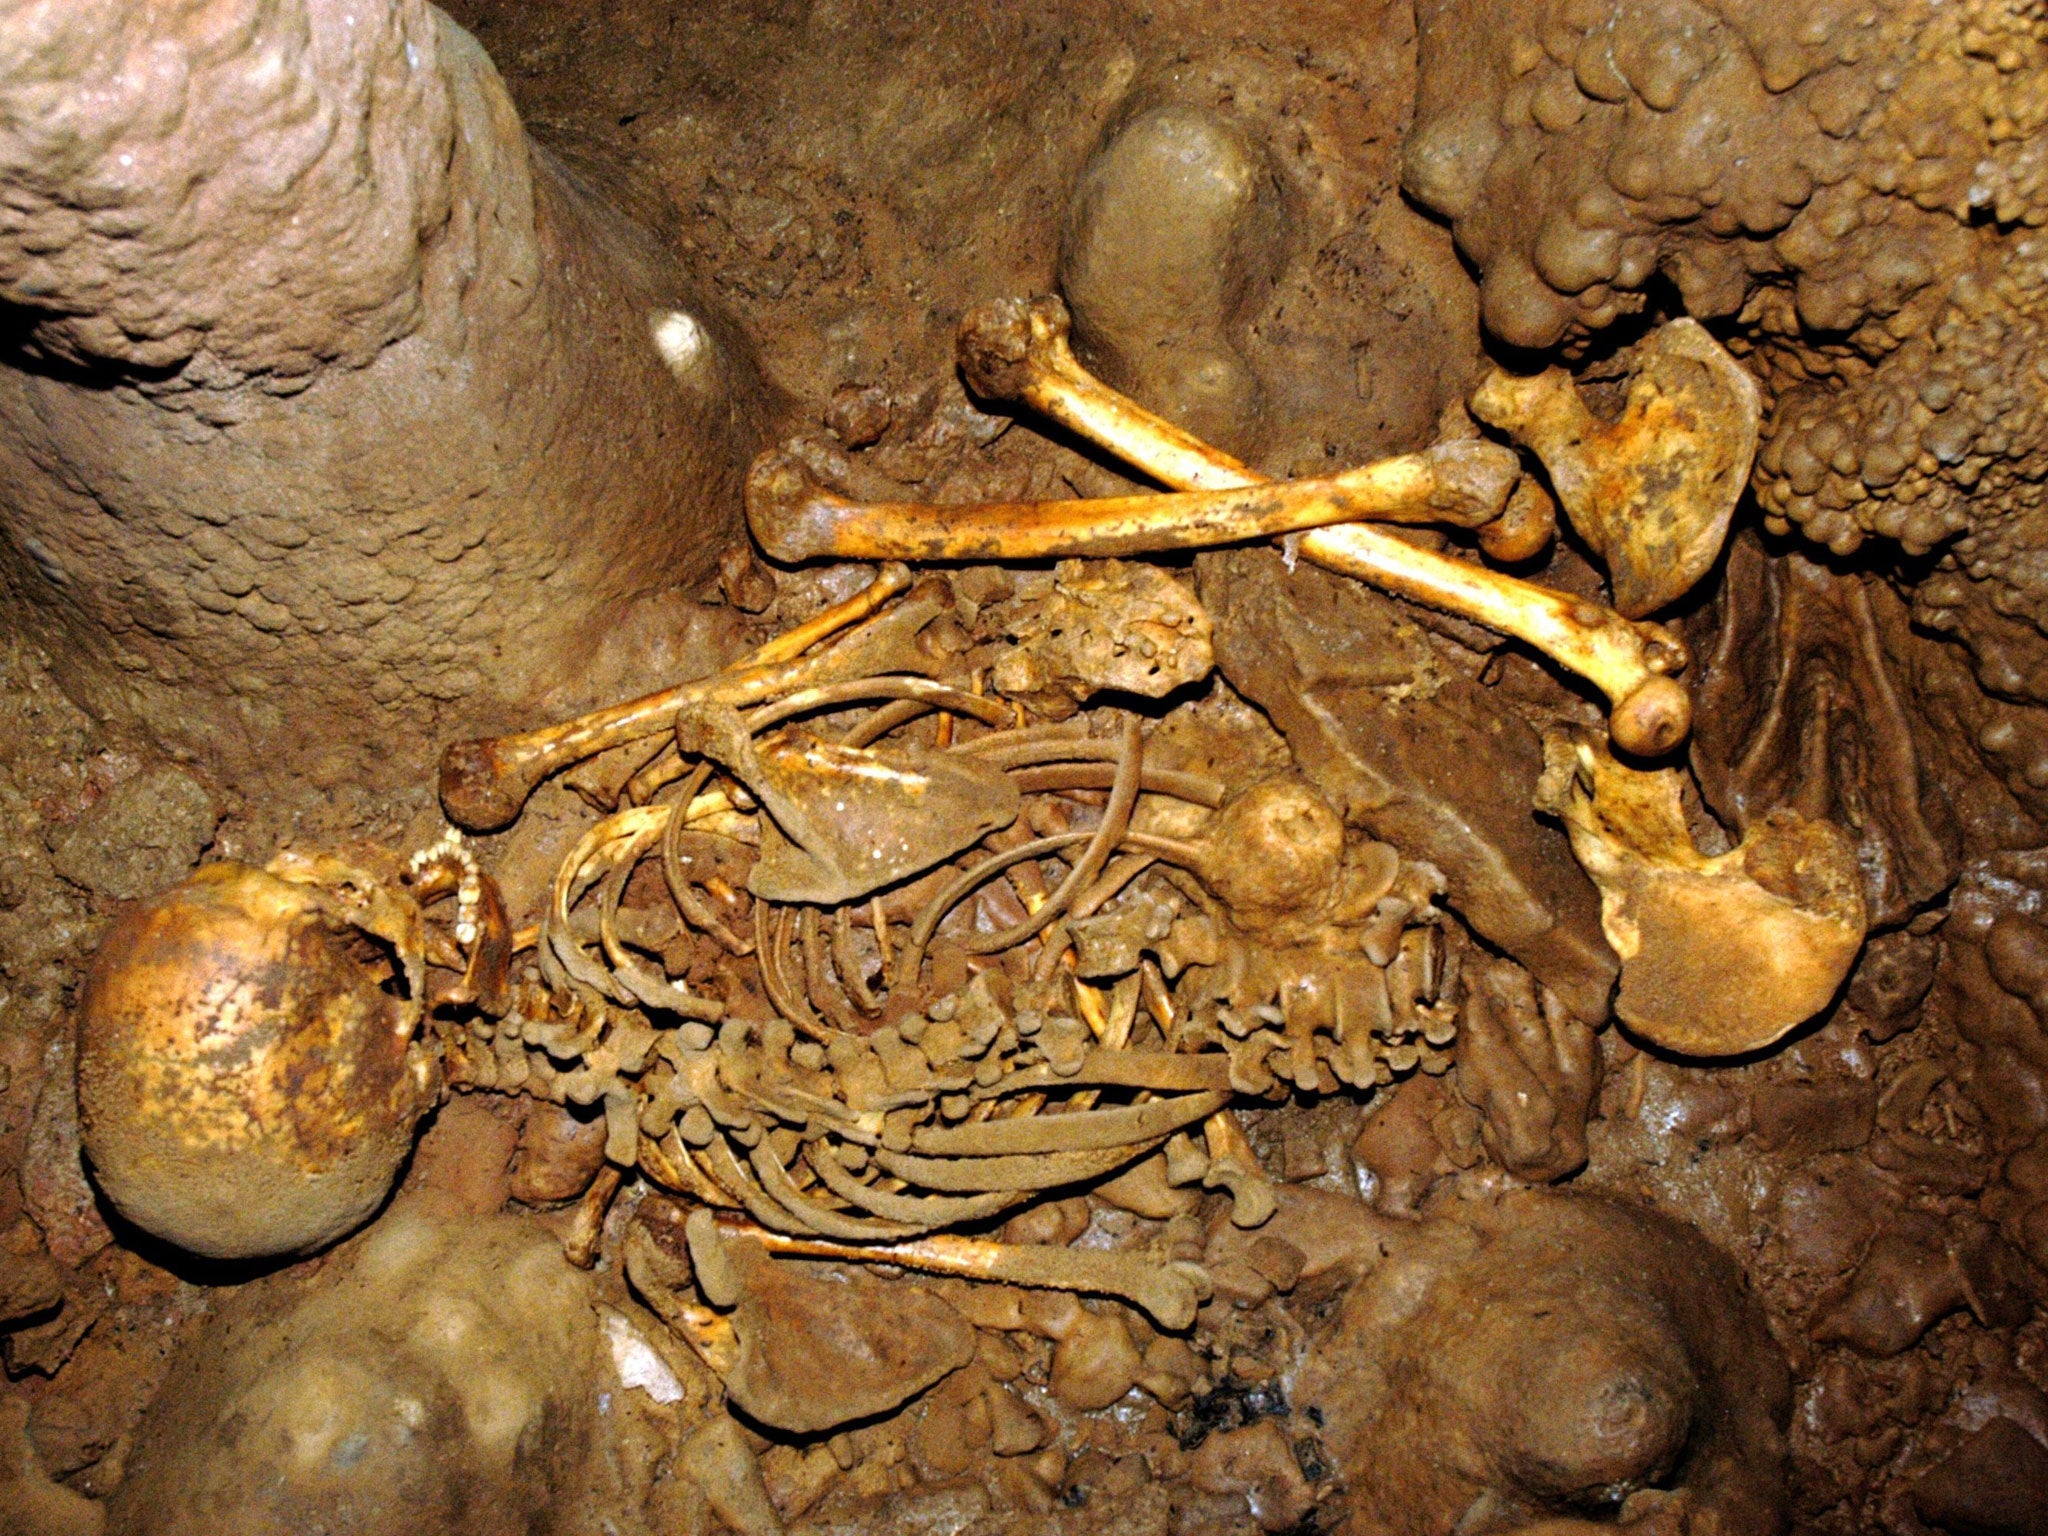 The 7,000-year-old skeleton; experts were astonished to find a combination of African and European genes in the ancient hunter gatherer